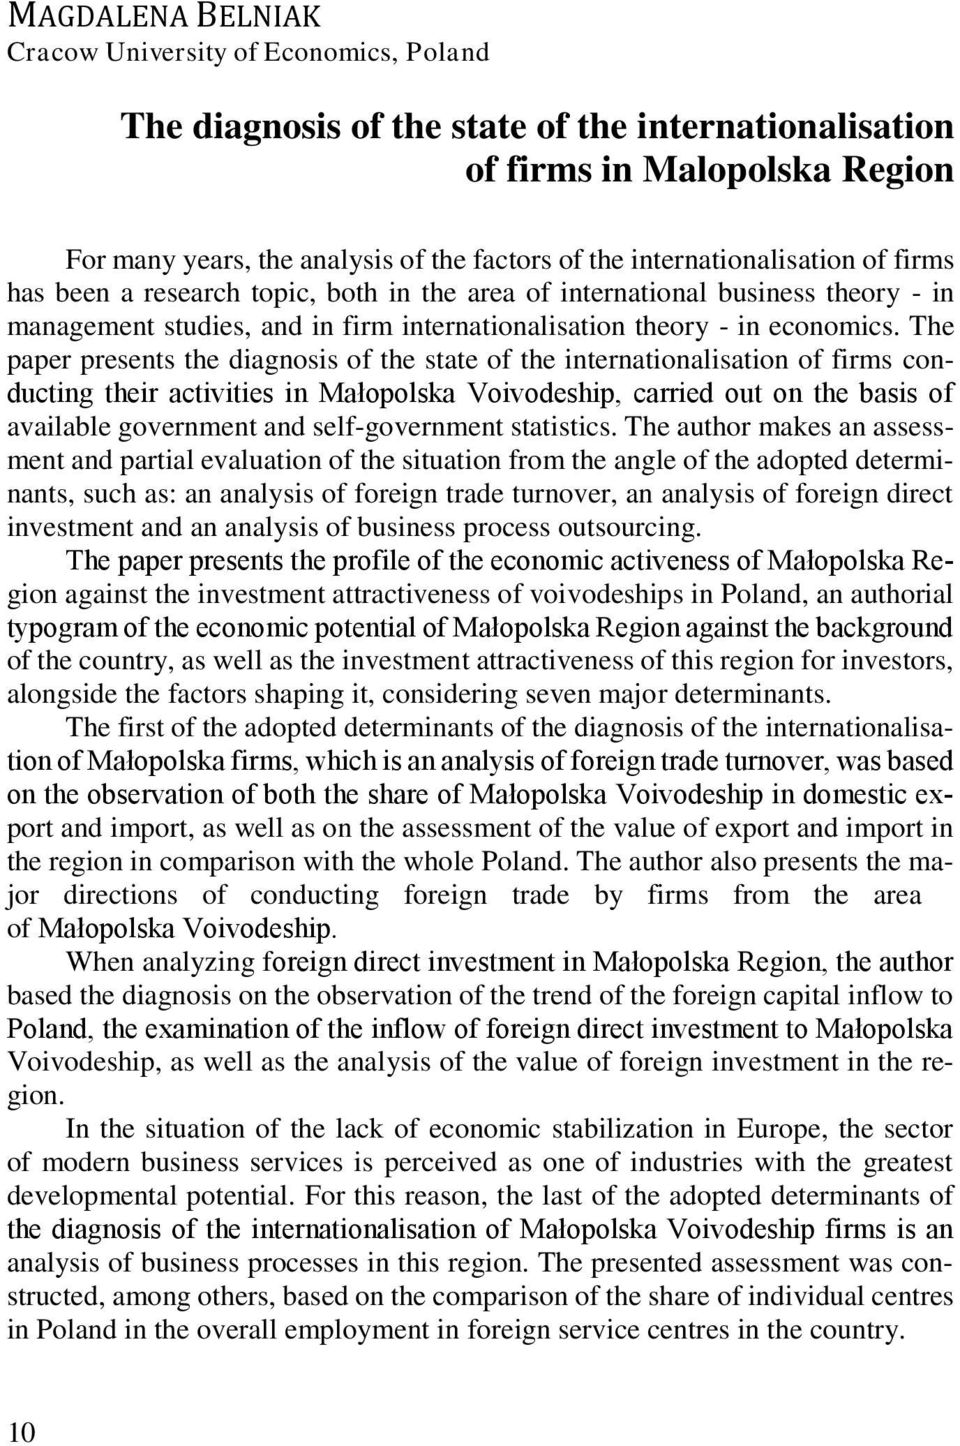 The paper presents the diagnosis of the state of the internationalisation of firms conducting their activities in Małopolska Voivodeship, carried out on the basis of available government and